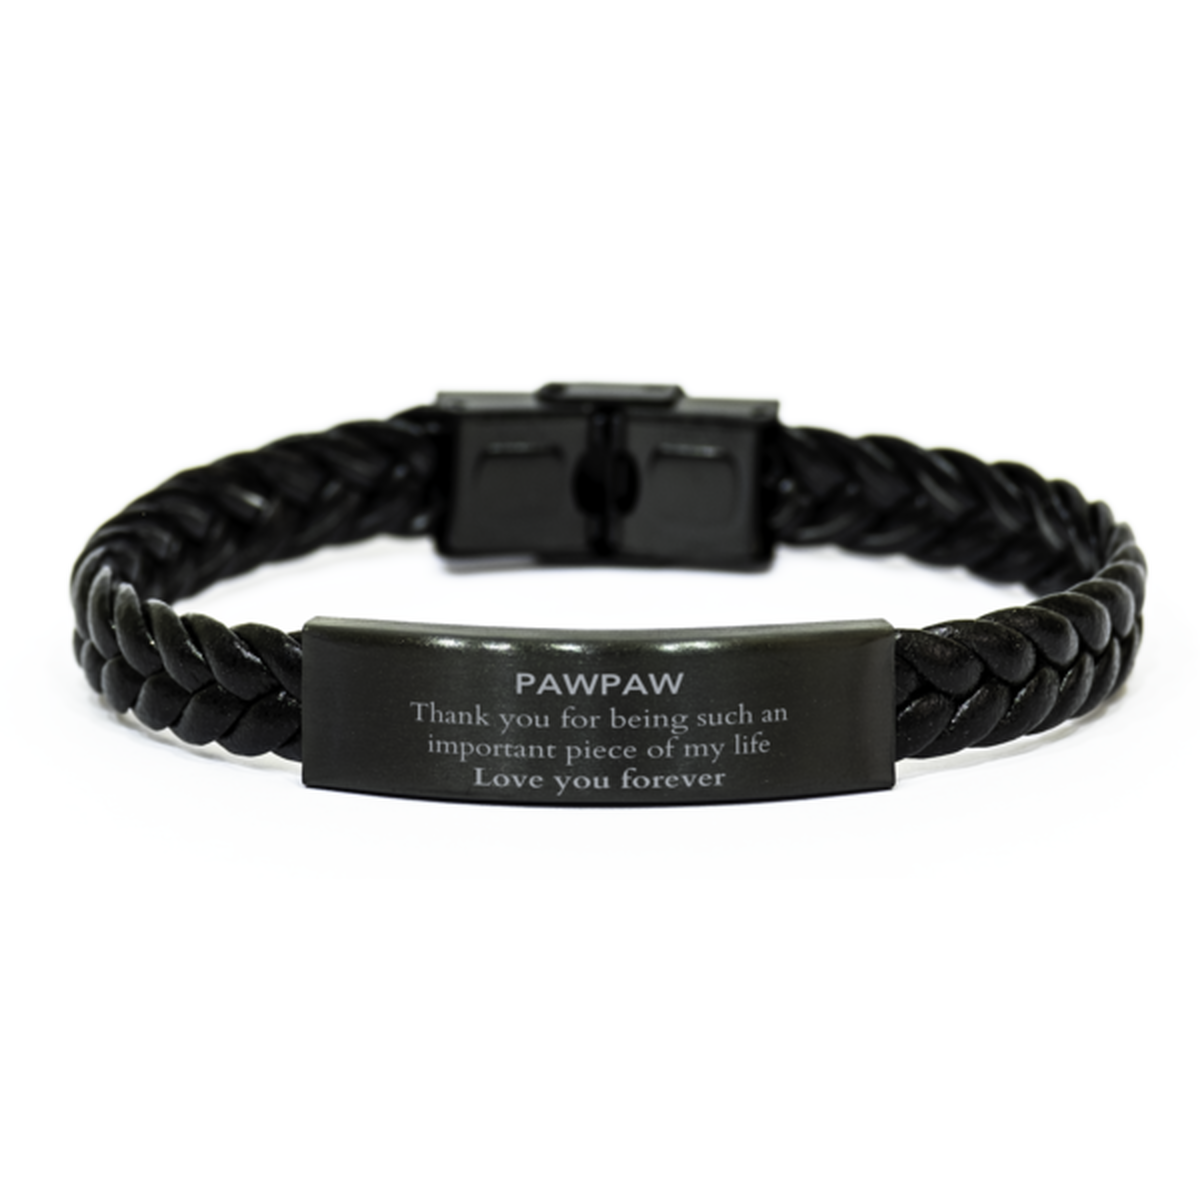 Appropriate Pawpaw Braided Leather Bracelet Epic Birthday Gifts for Pawpaw Thank you for being such an important piece of my life Pawpaw Christmas Mothers Fathers Day